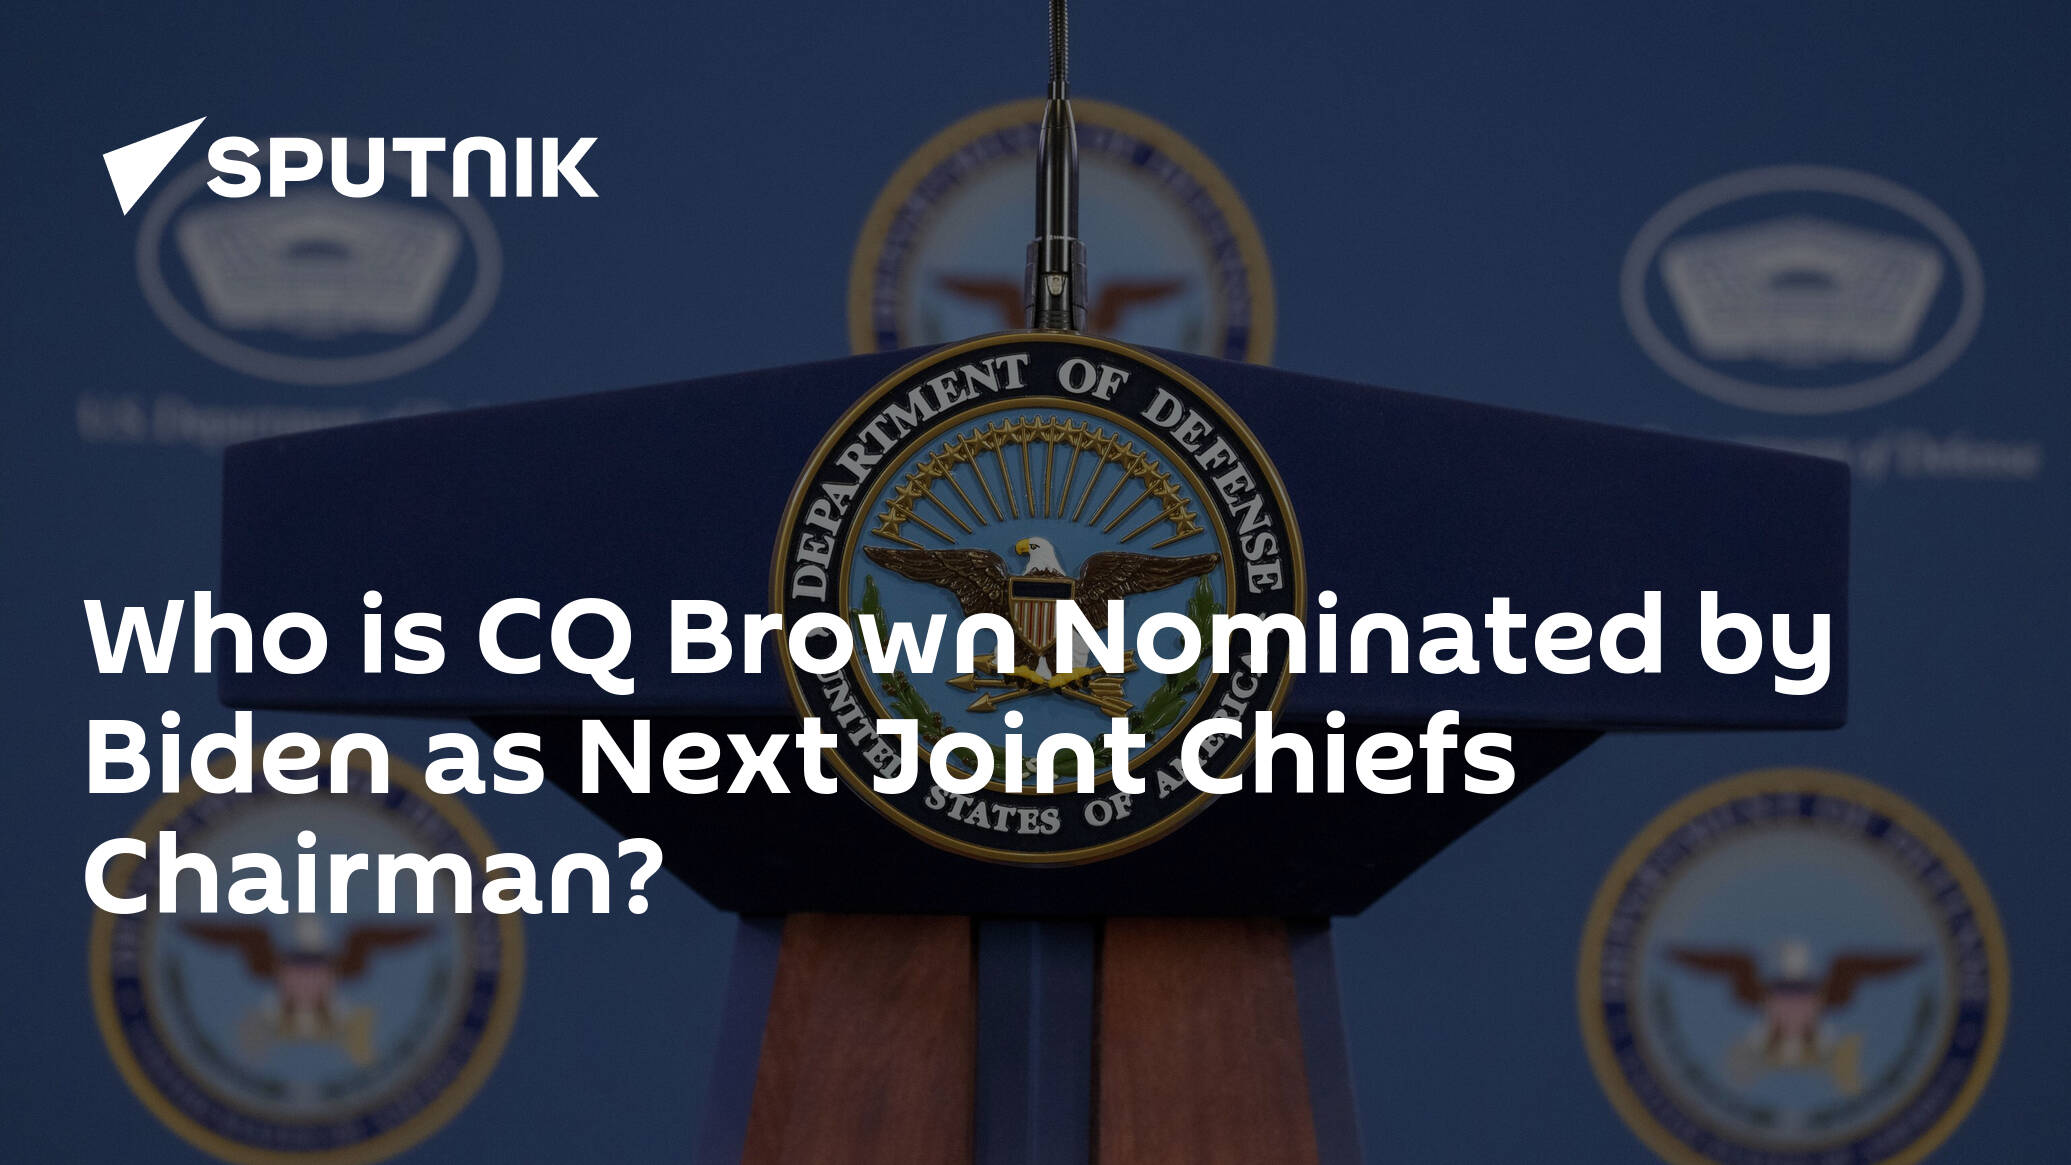 Who is CQ Brown Nominated by Biden as Next Joint Chiefs Chairman?